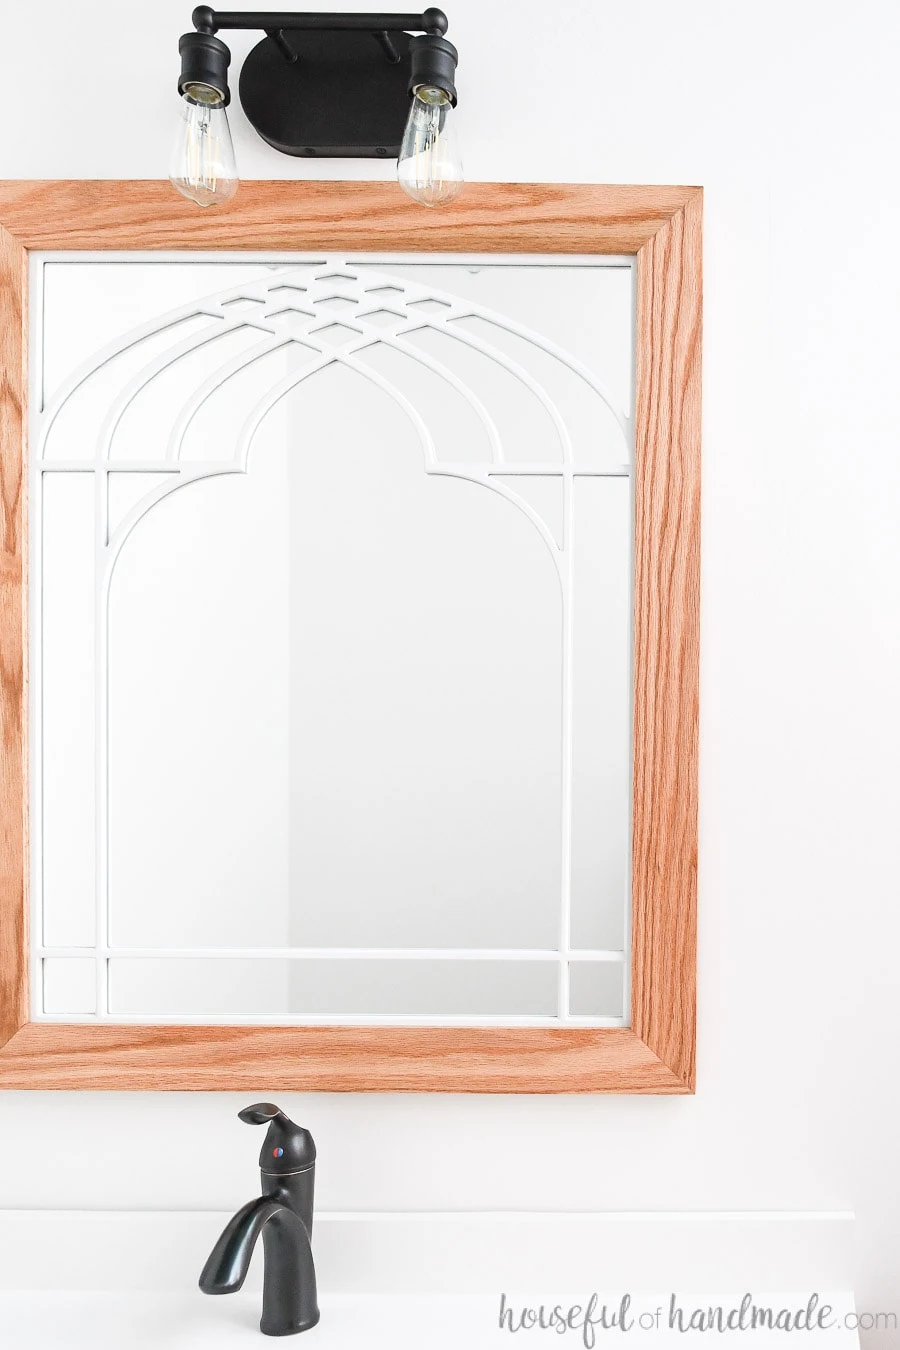 Bathroom mirror that looks like a window with cathedral arch in the center and wood frame. 